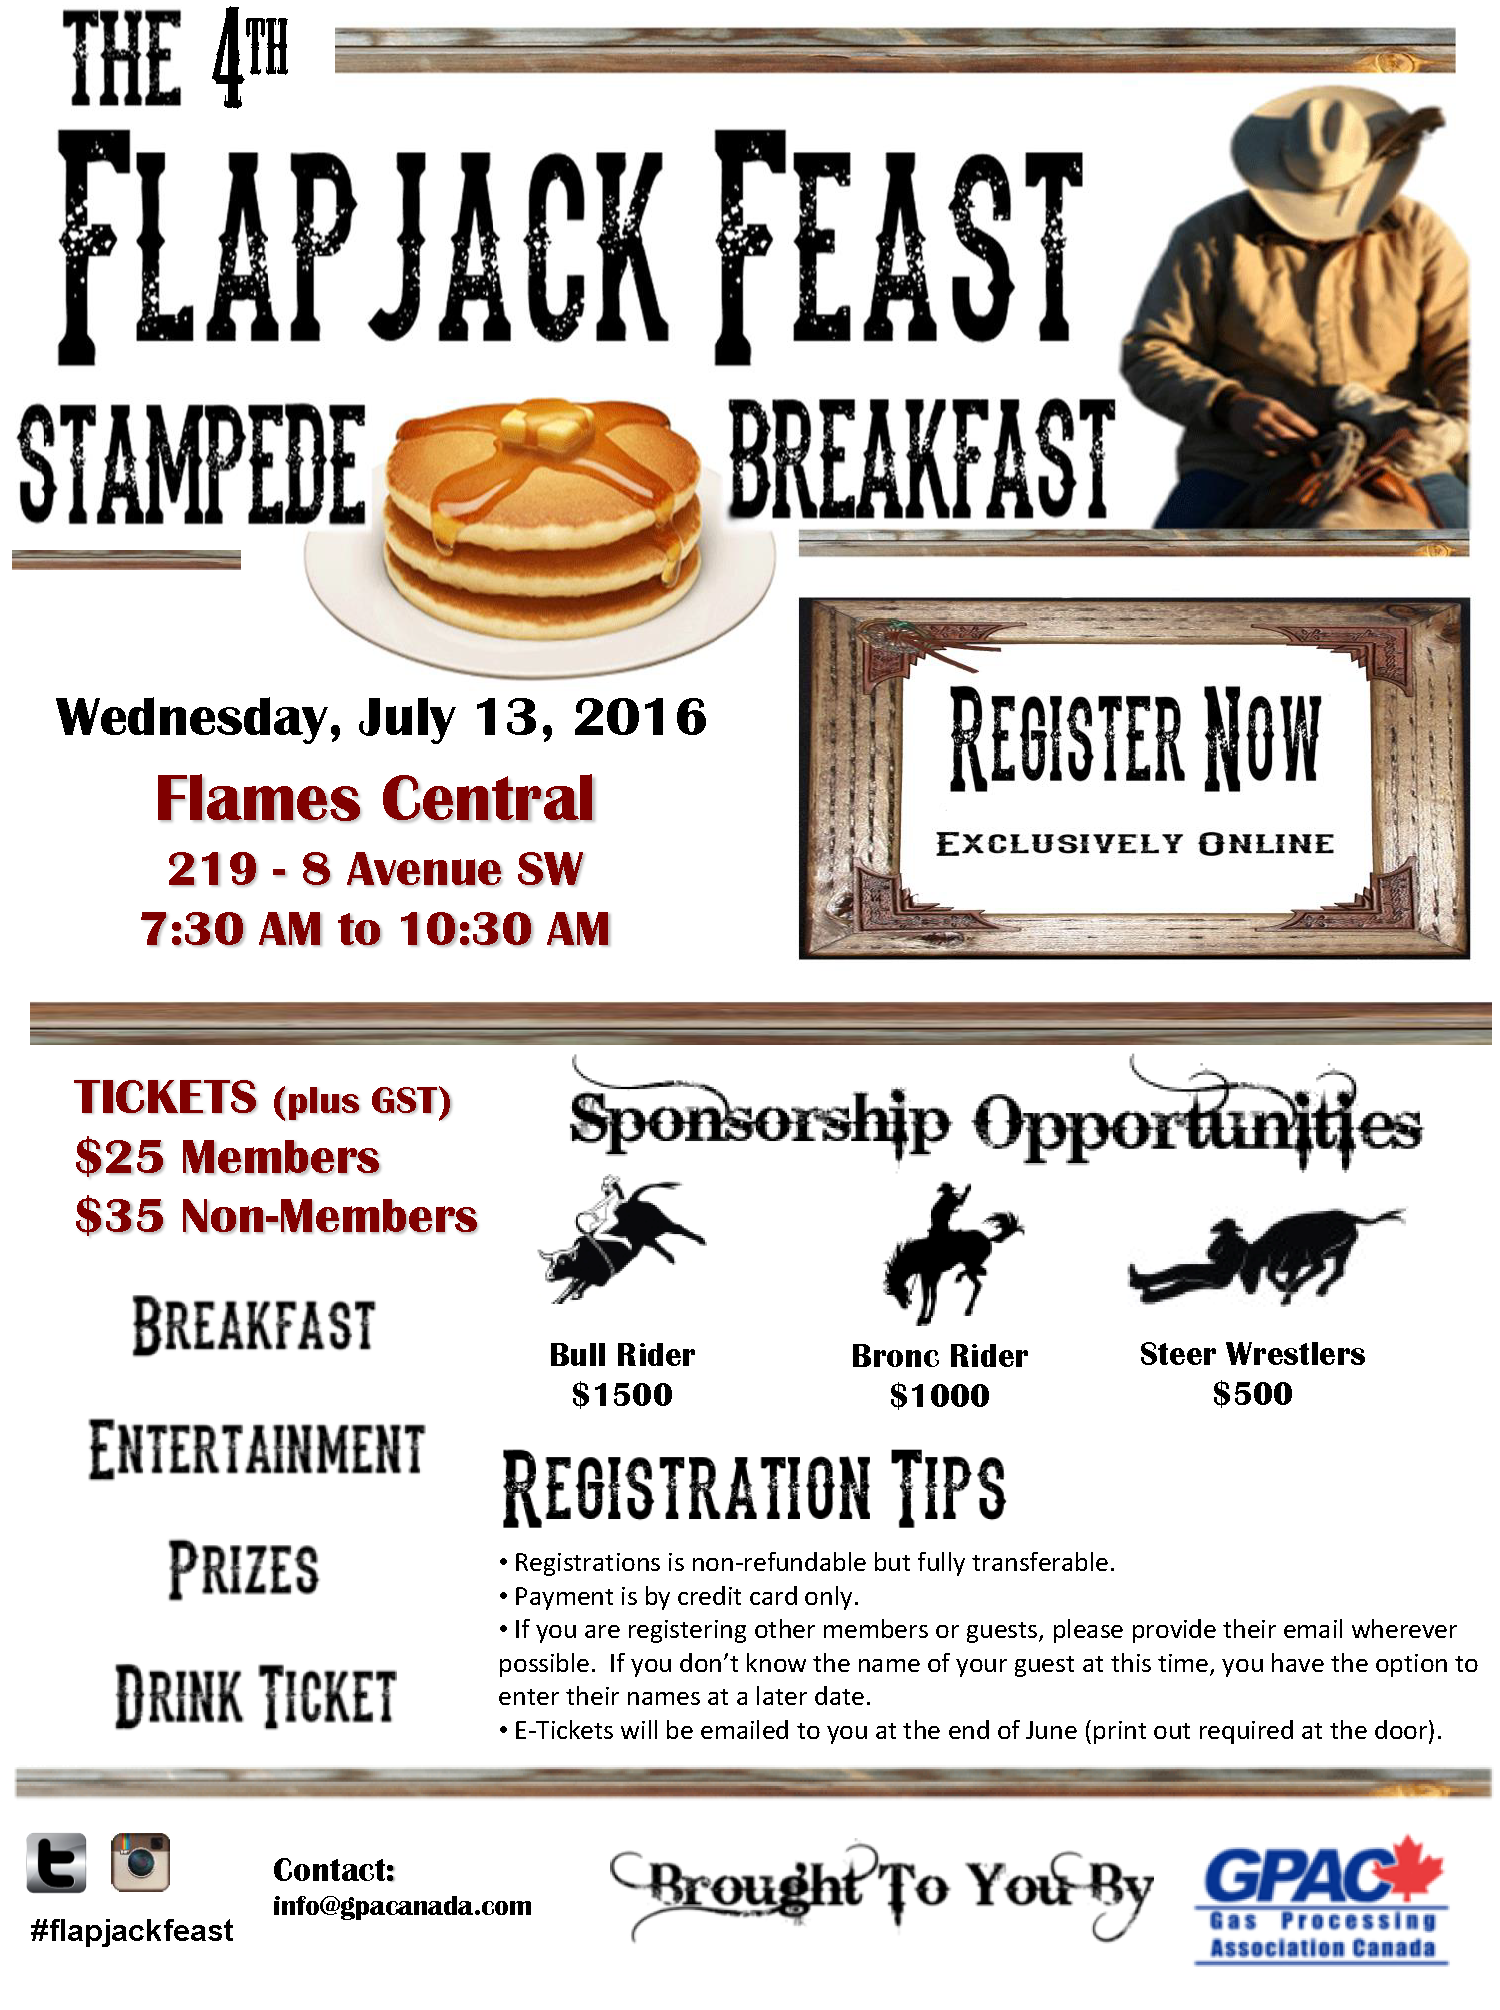 SAVE THE DATE_Flapjack Feast_July 13